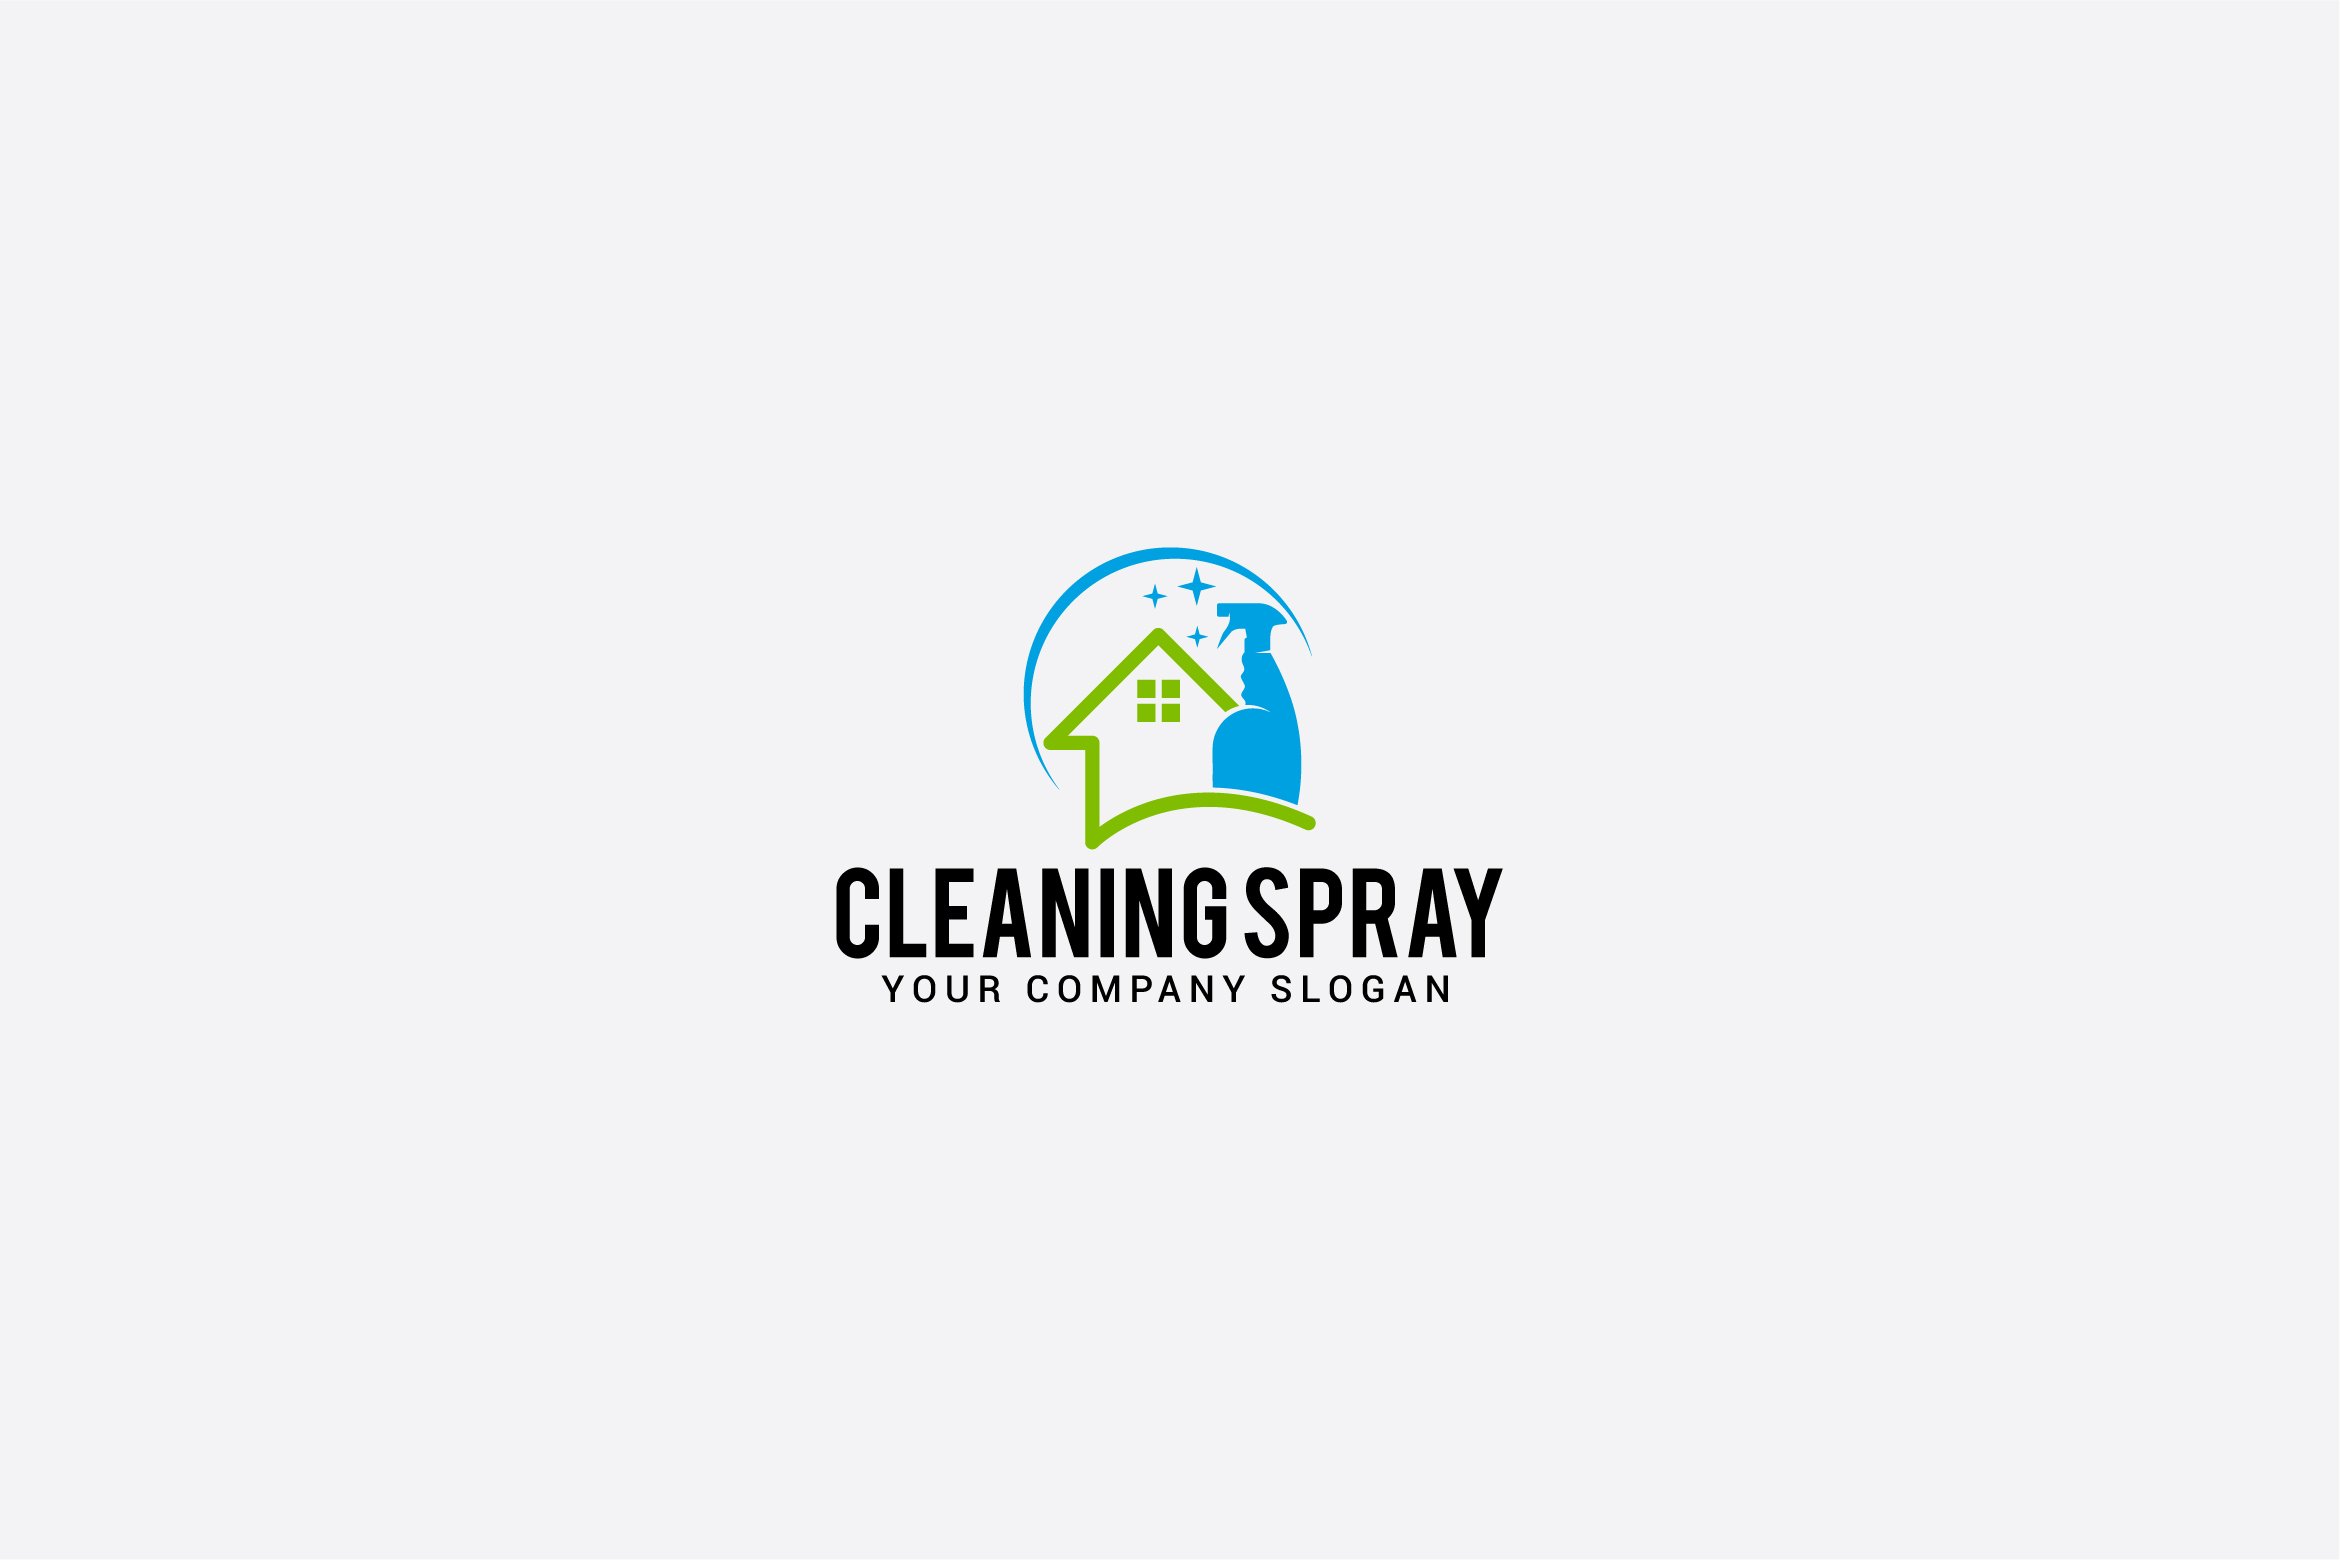 cleaning spray logo cover image.